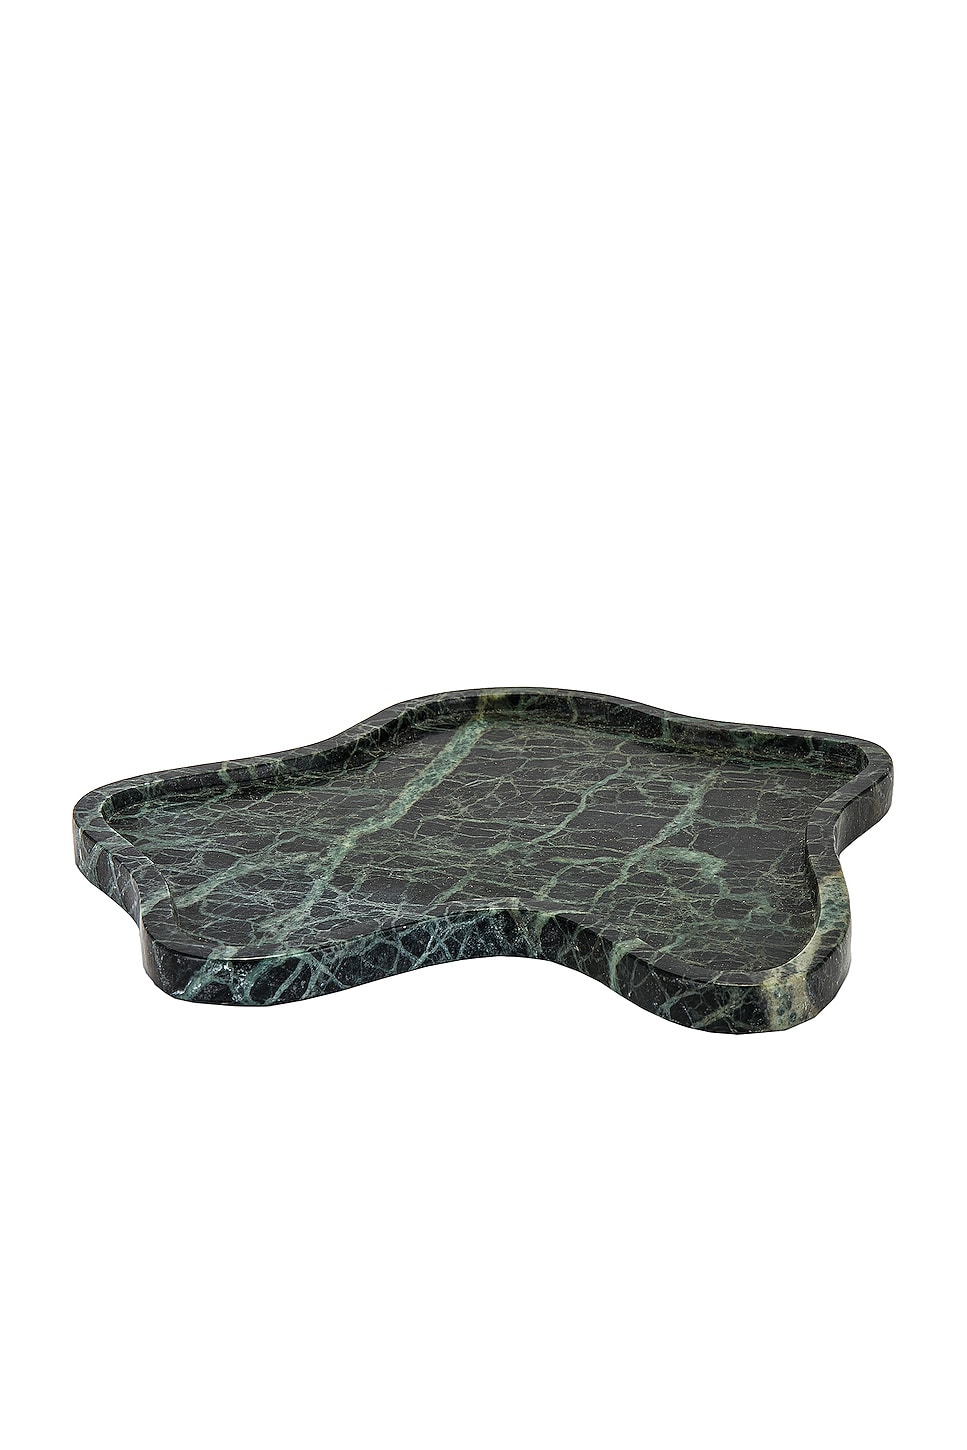 Image 1 of Anastasio Home The Flo Tray in Emerald